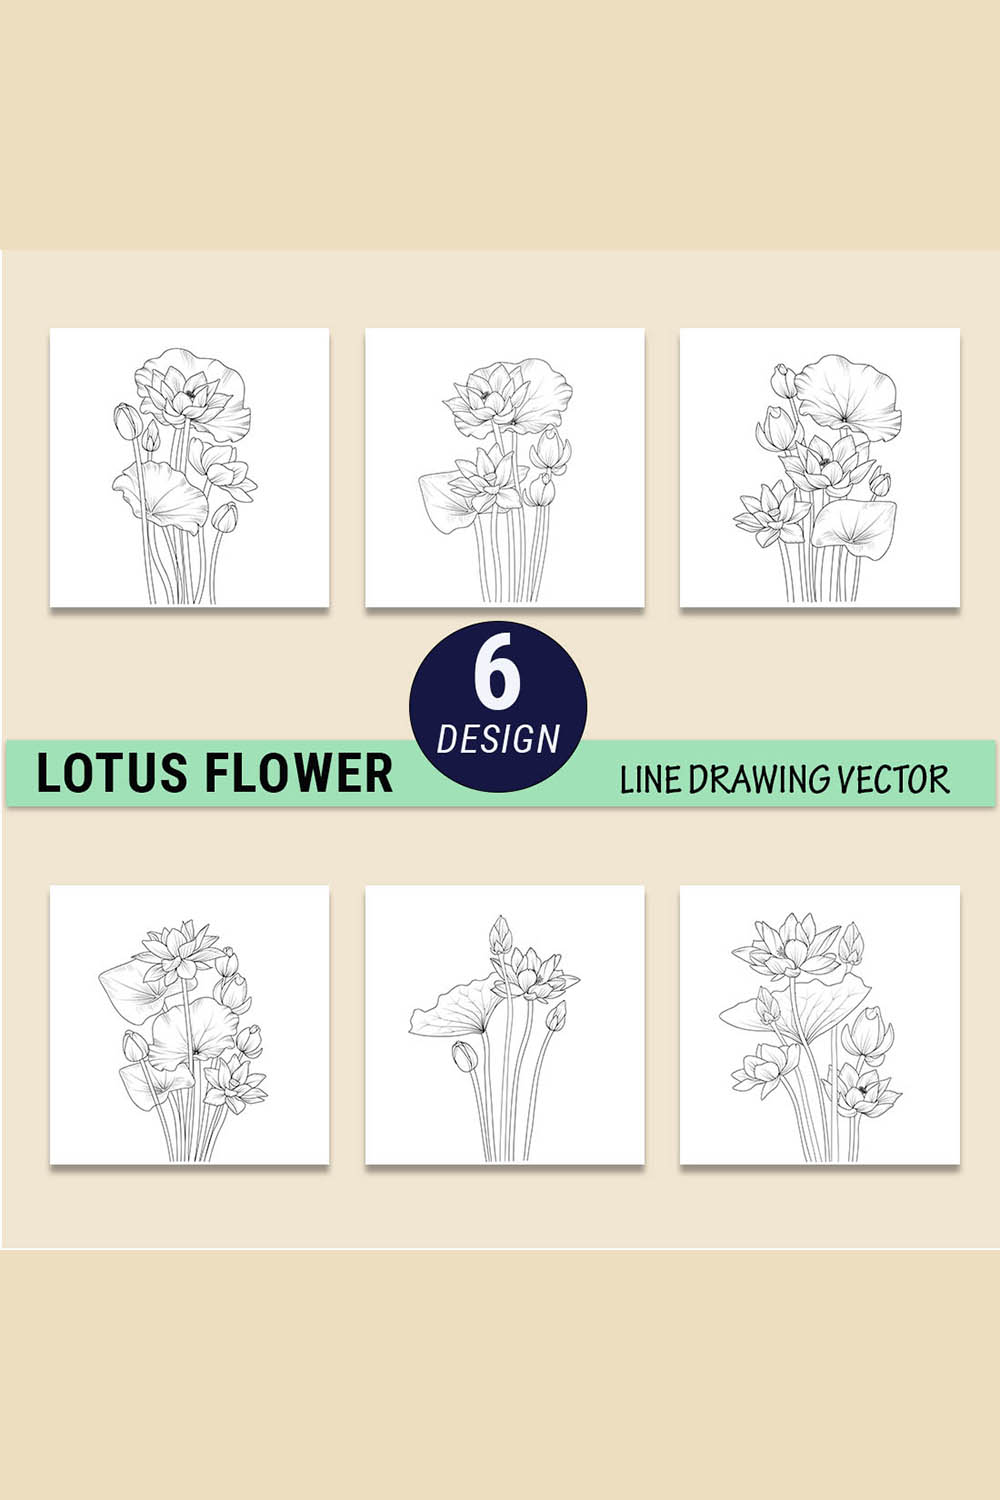 pencil sketch tattoo realistic lotus flower drawing, realistic lotus flower outline, sketch lotus flower drawing, realistic sketch lotus flower drawing pinterest preview image.